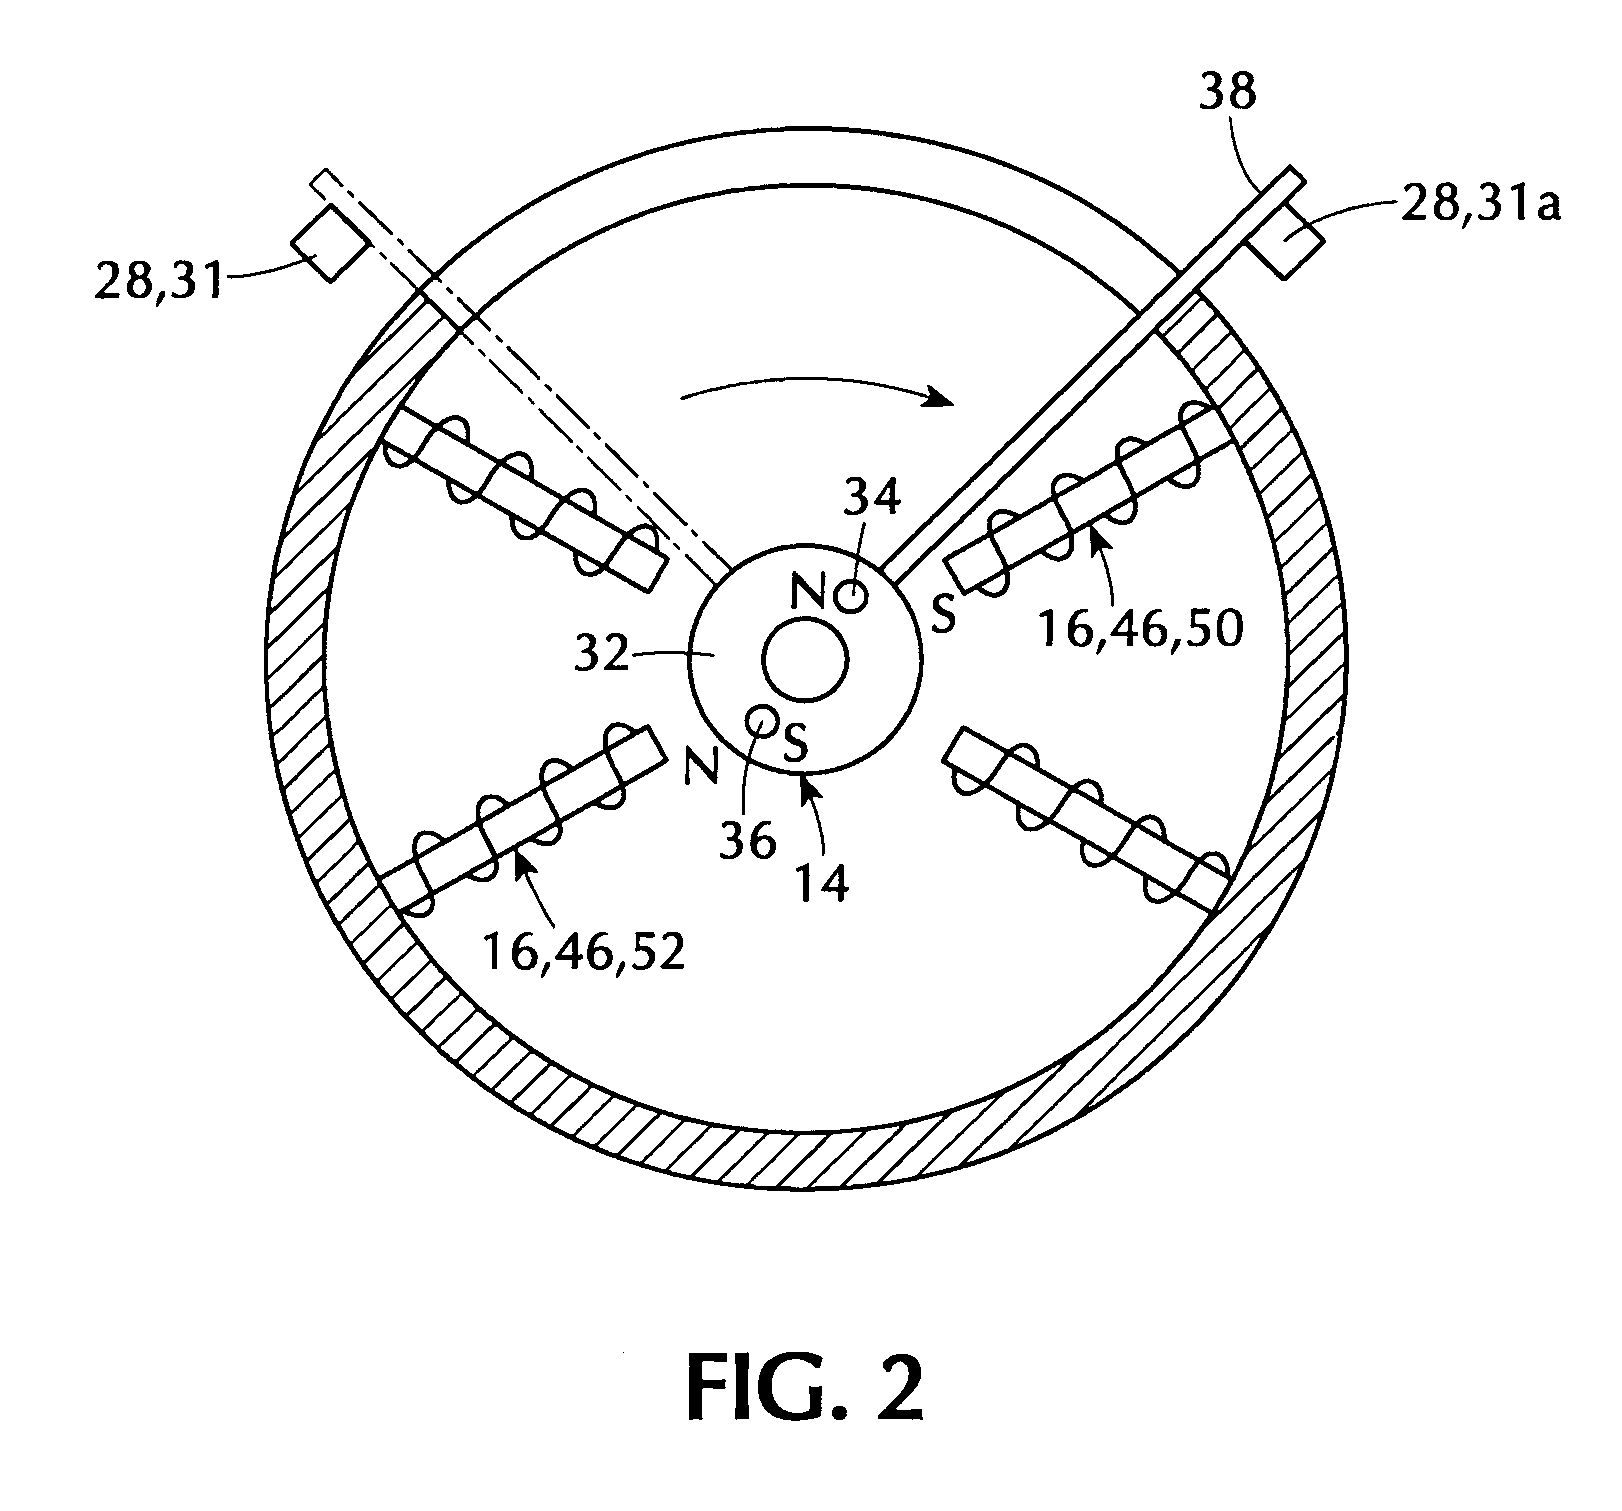 Self-latching sector motor for producing a net torque that can be backed-up or doubled